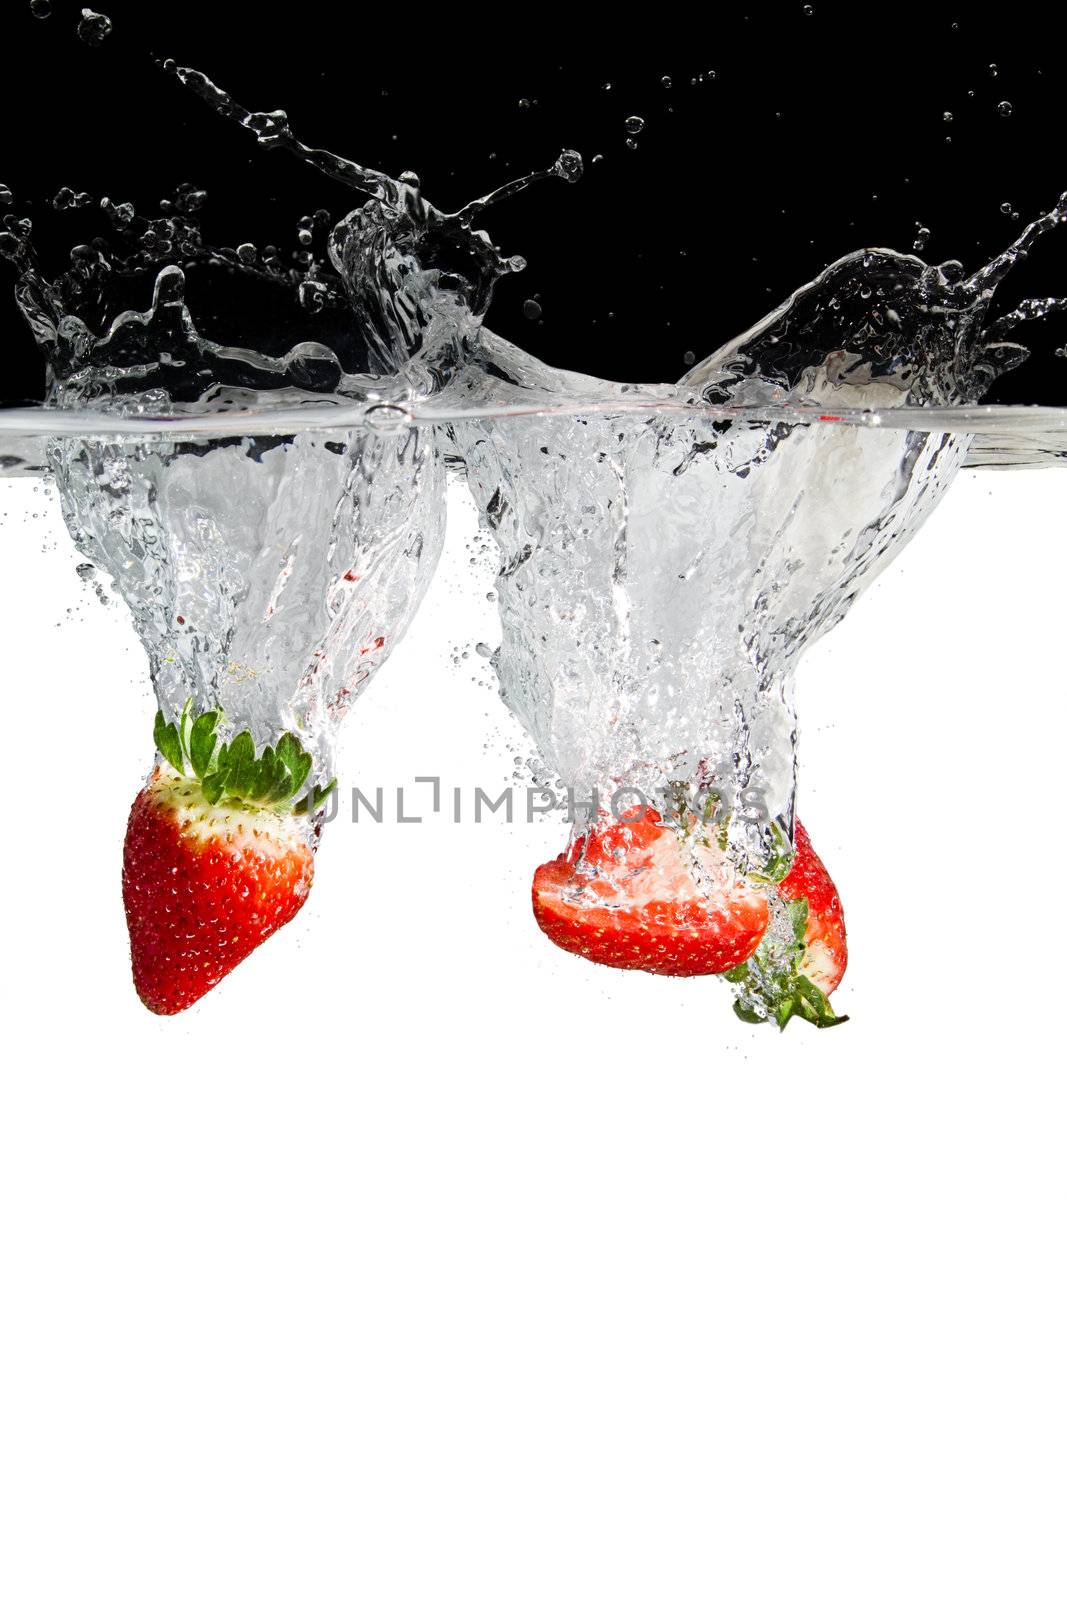 three strawberry pieces in water by RobStark